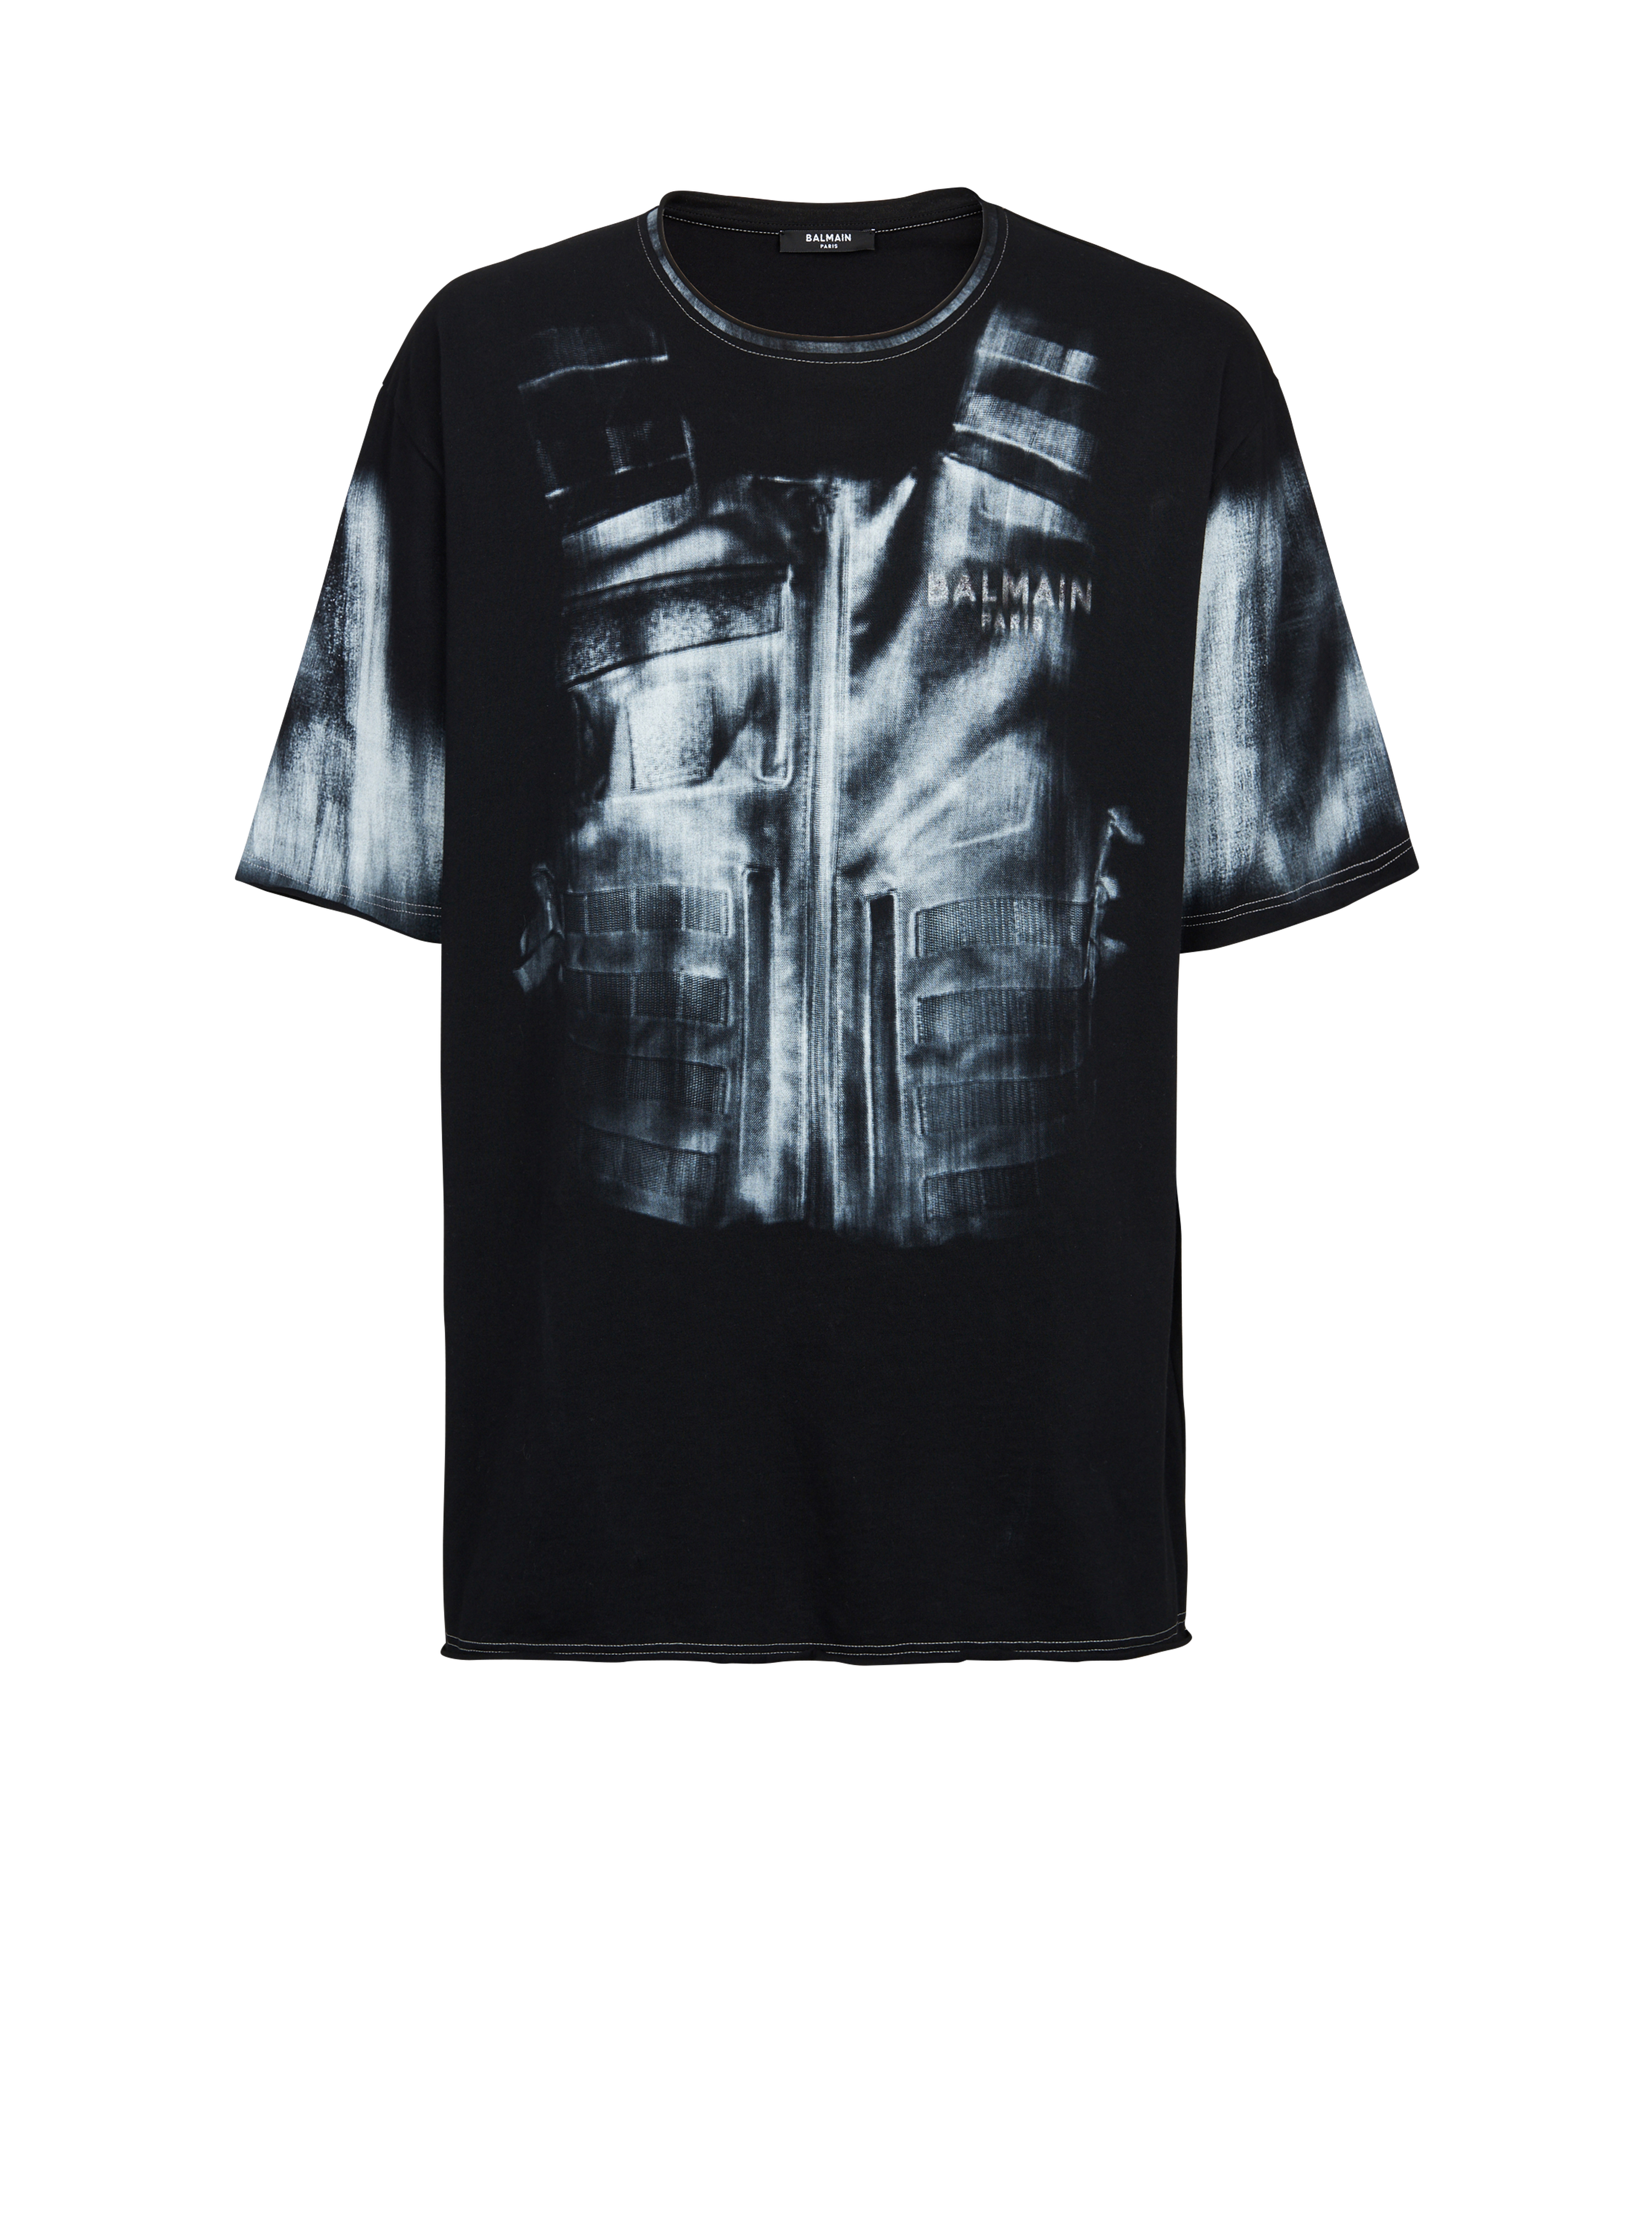 Cotton T-shirt with body armour print, black